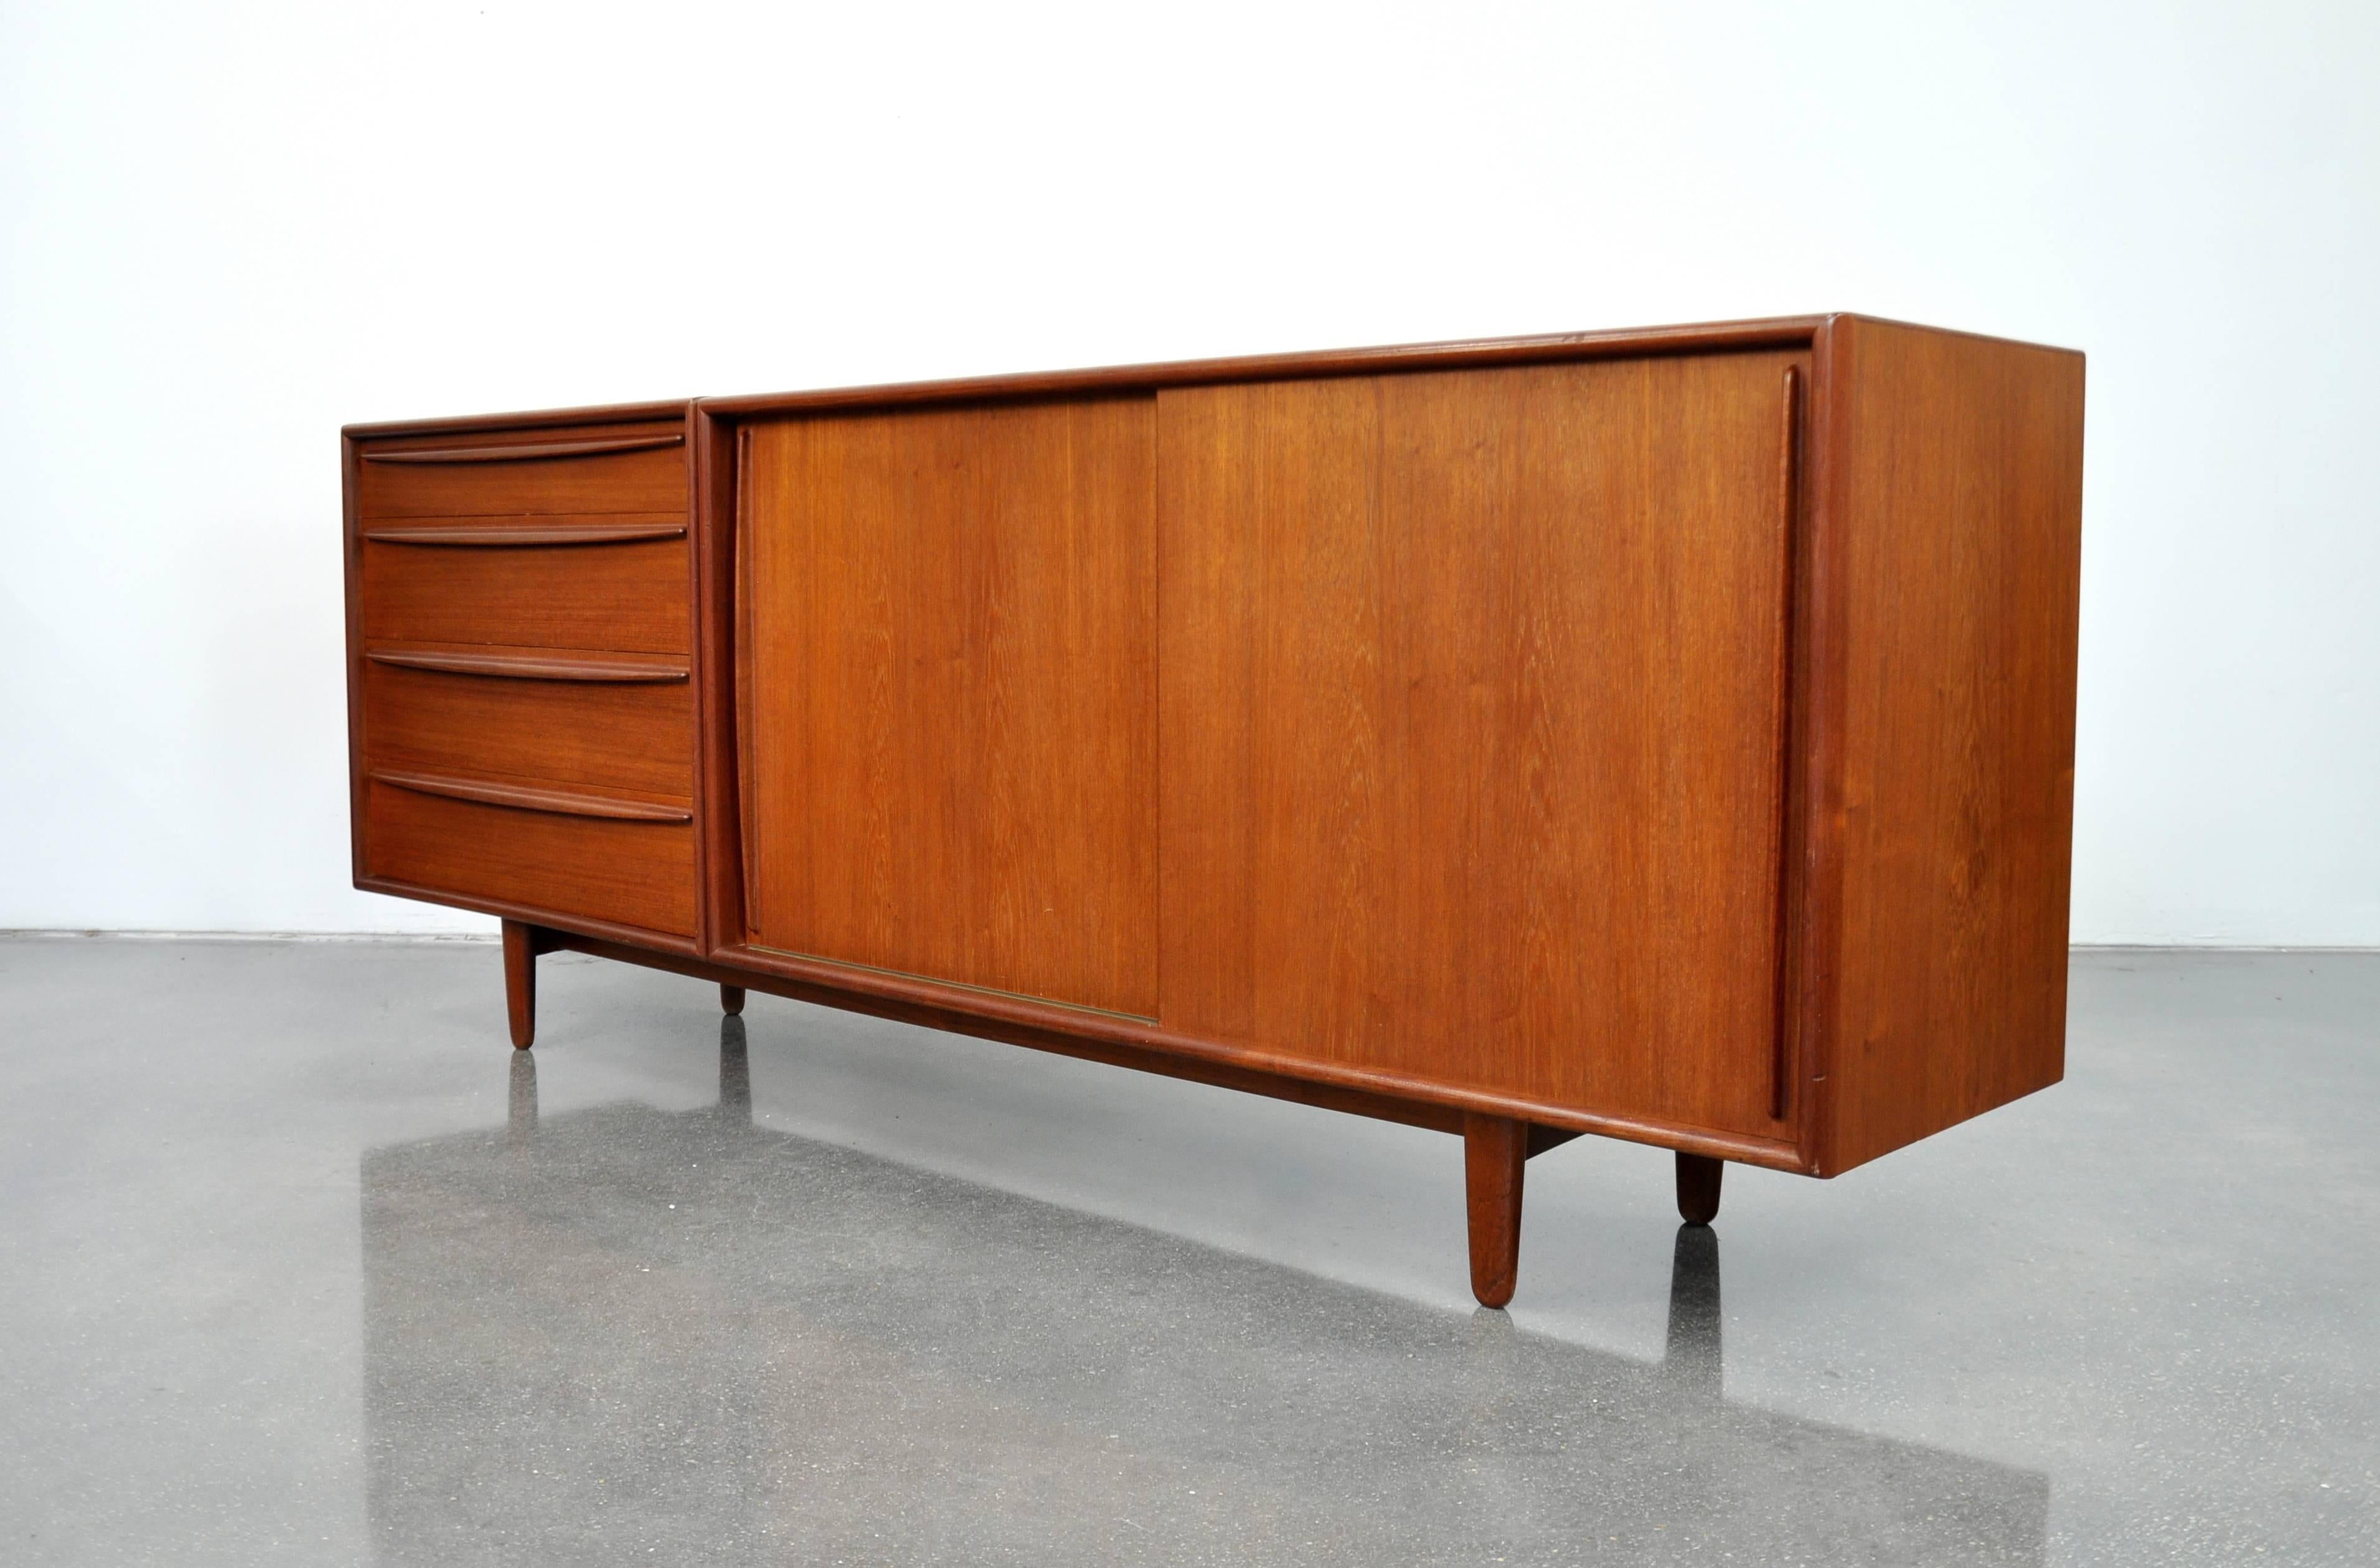 Beautiful midcentury Danish Modern teak bar cabinet, designed by Svend Madsen for Falster, made in Denmark in the 1960s. The sideboard features two sliding doors opening to an interior fitted with two (2) shelves and a felt-lined drawer, and a